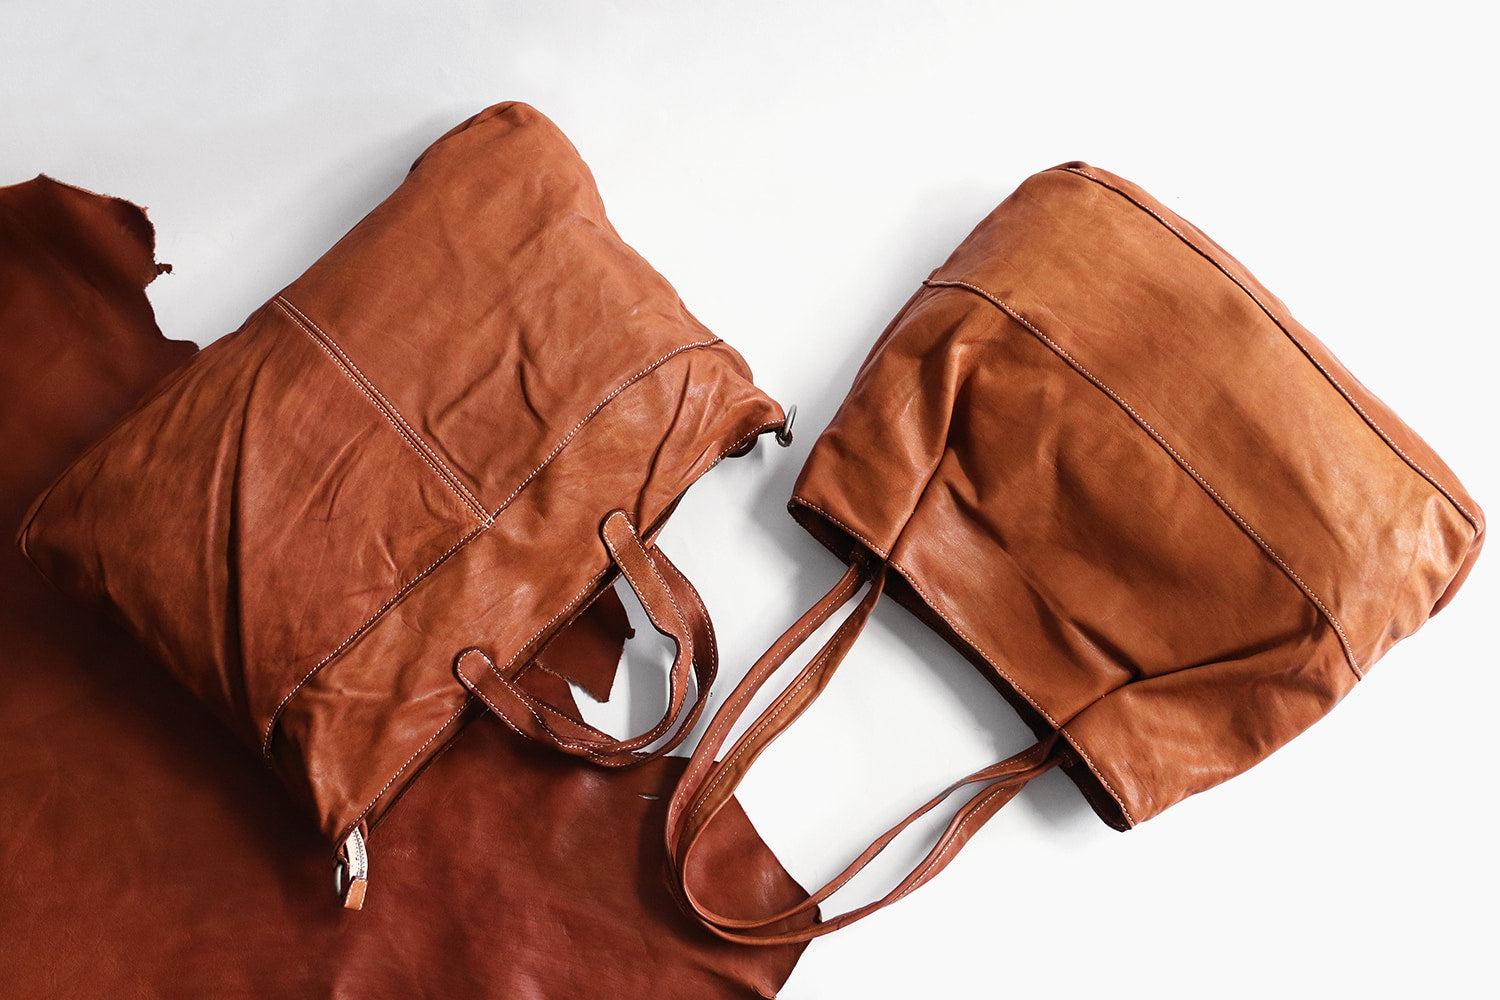 REALMIND / FORO-light Soft and light 2-way bag made of high-quality piece-dyed horse tan leather 